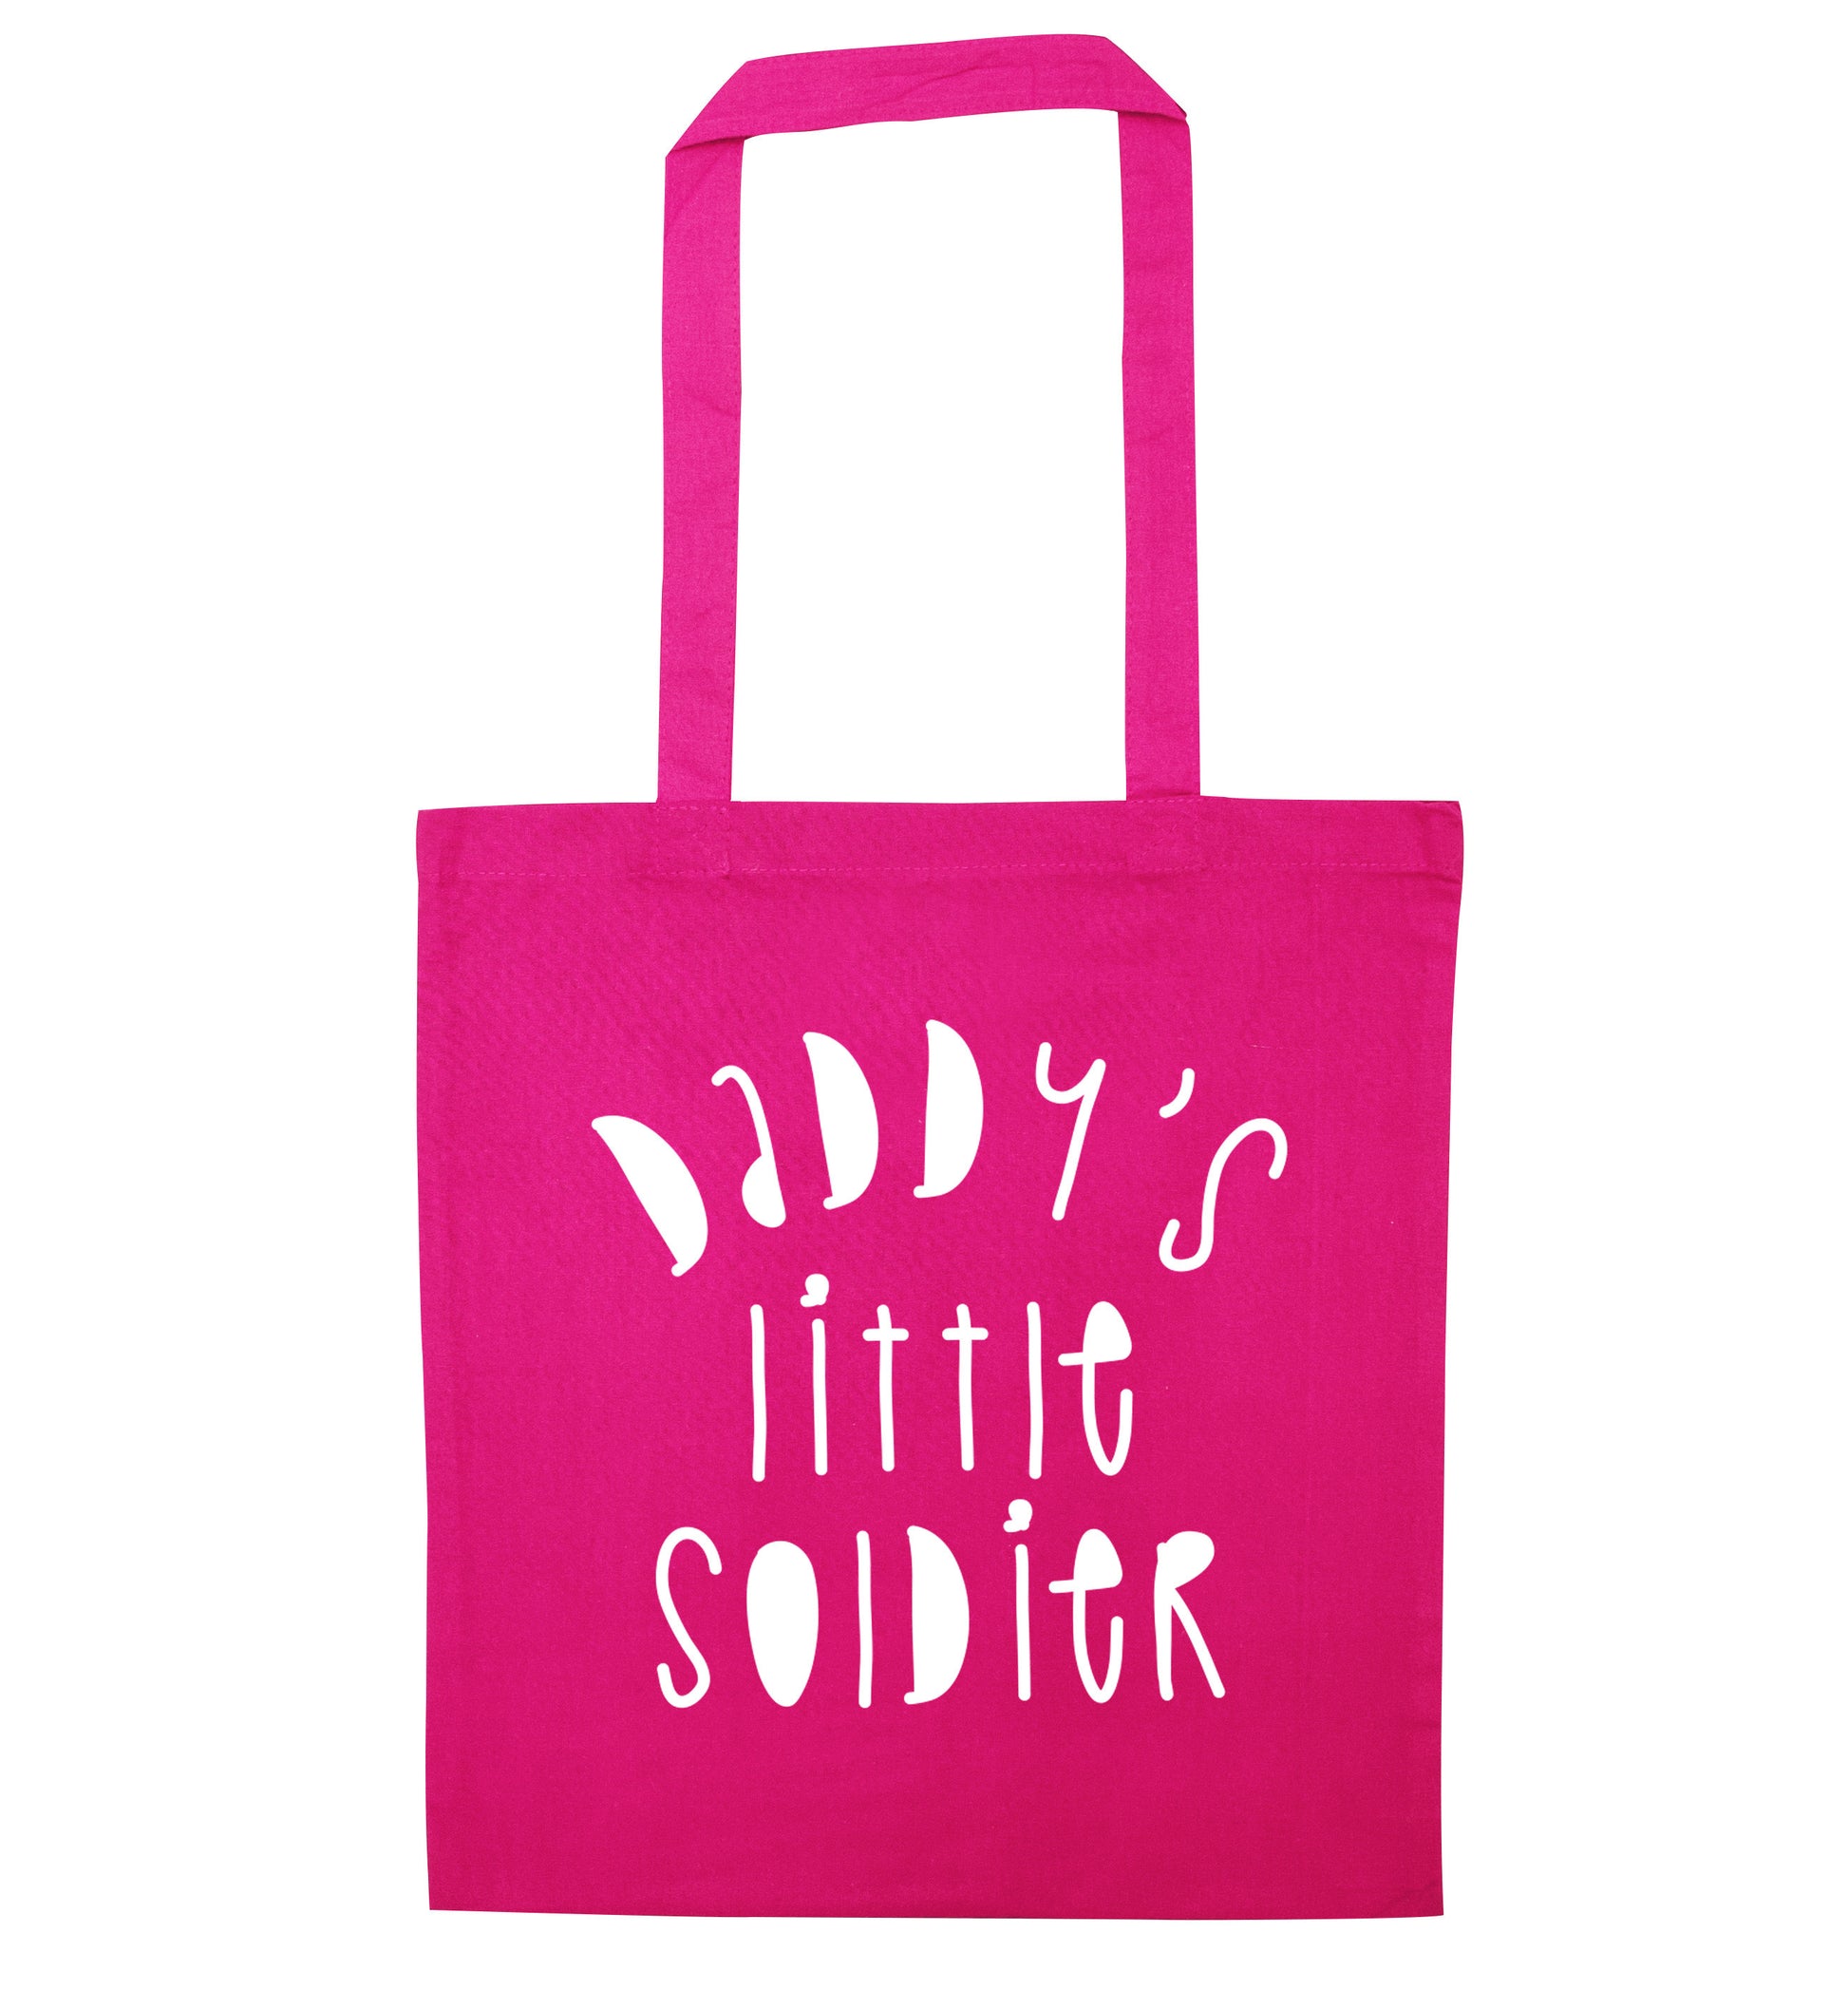 Daddy's little soldier pink tote bag